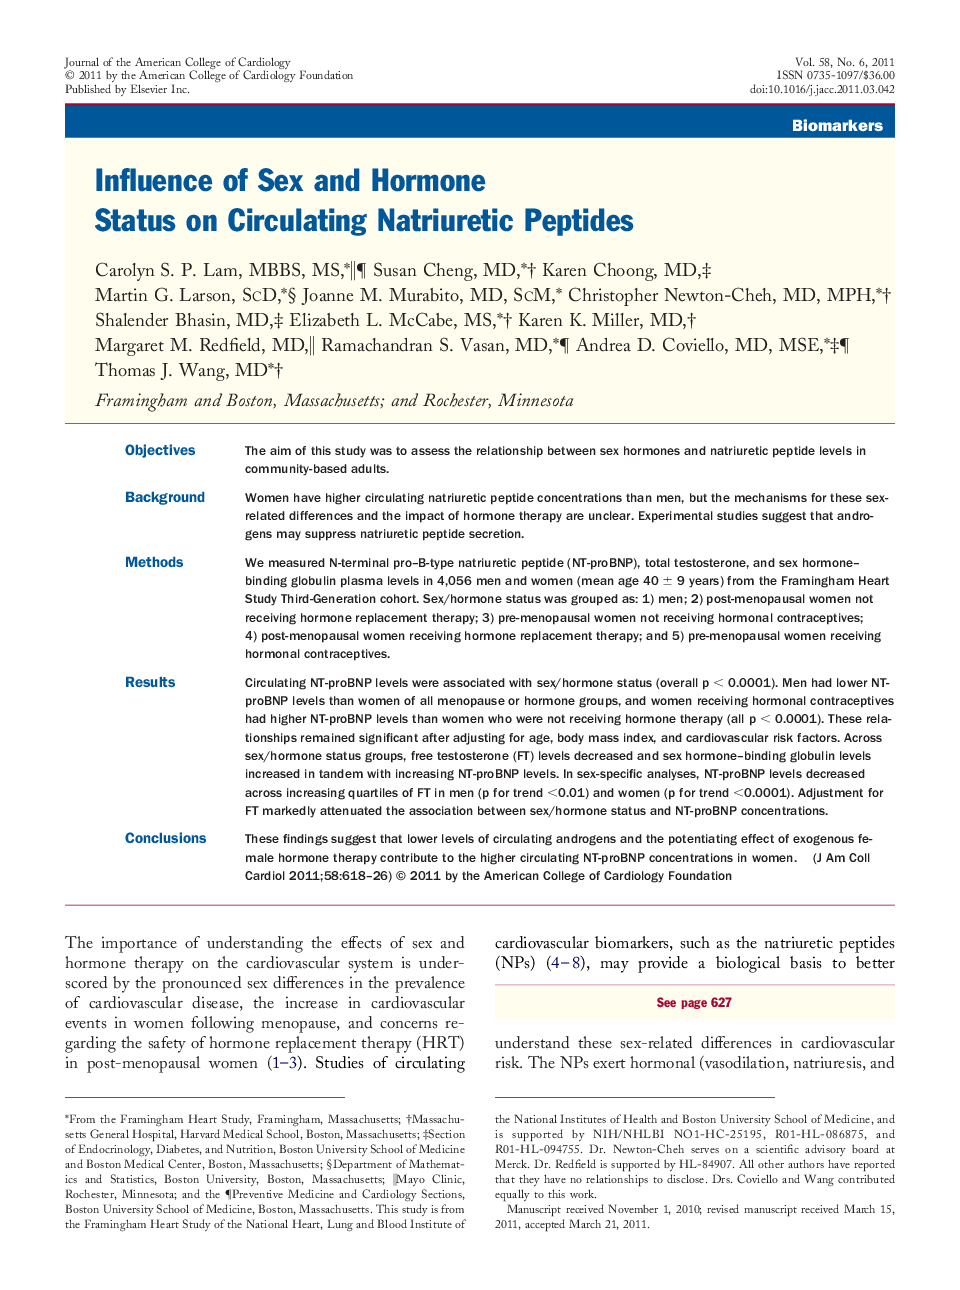 Influence of Sex and Hormone Status on Circulating Natriuretic Peptides 